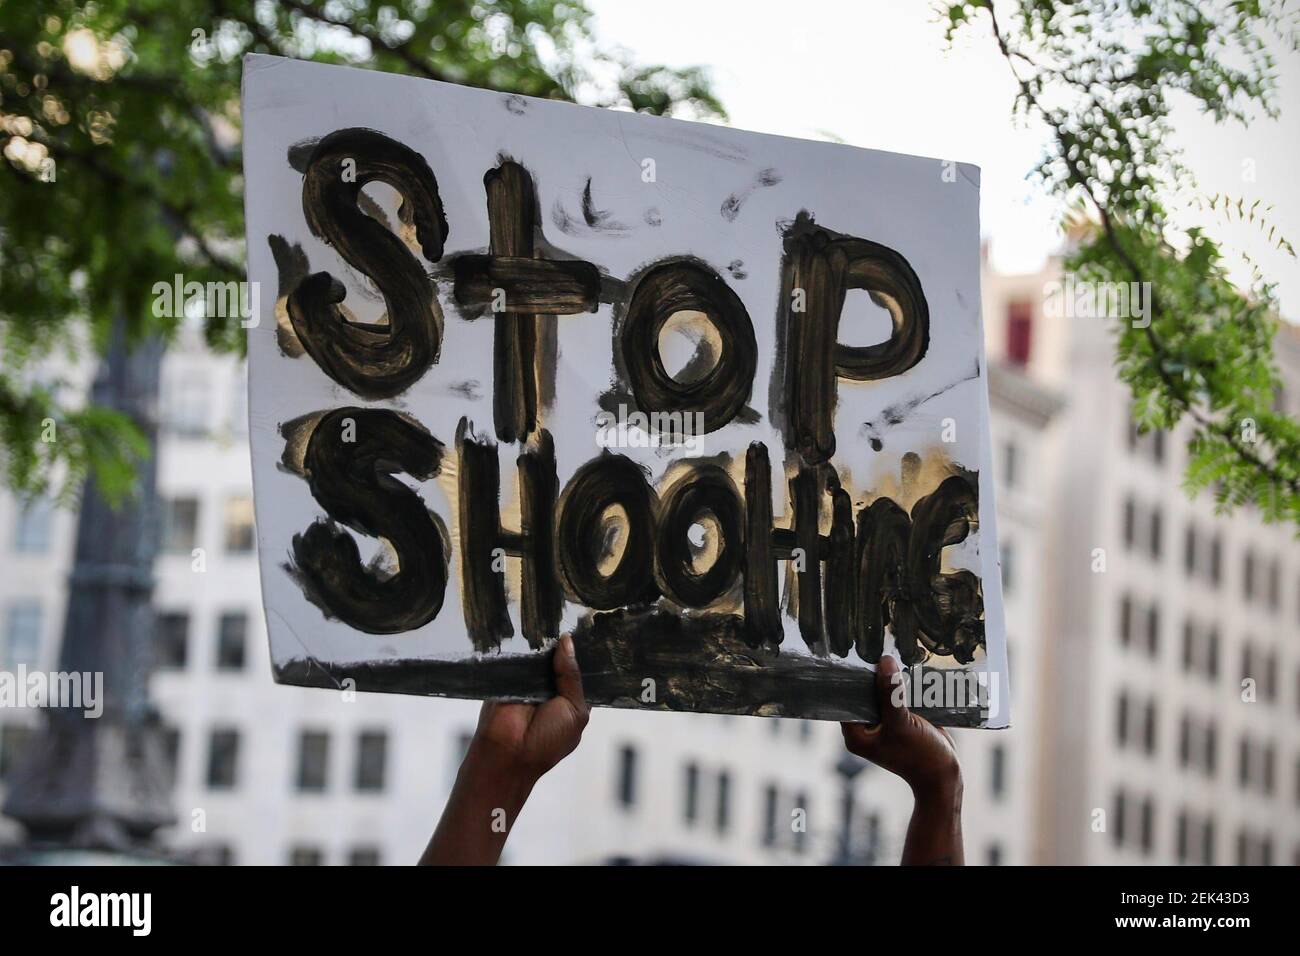 Scenes from a protest that began at Monument Circle in the afternoon and moved through downtown Indianapolis, Indiana on the evening of Friday, May 29, 2020. The protest comes after a series of prominent Black deaths that have inflamed racial tensions across the United States. (Photo by Jenna Watson/IndyStar/USA Today Network/Sipa USA) Stock Photo